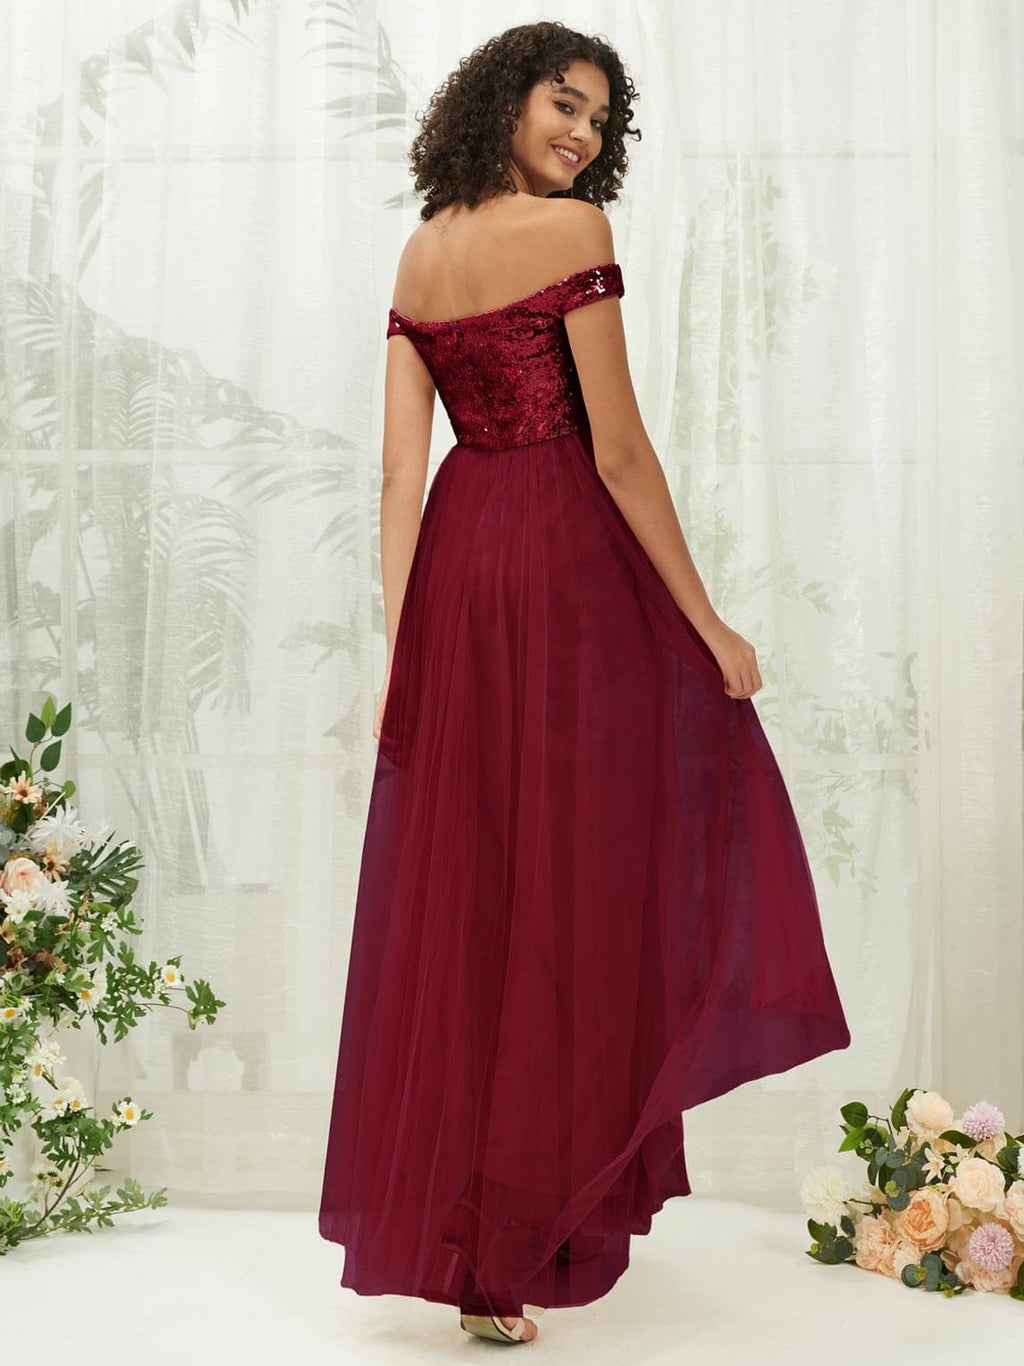 NZ Bridal Burgundy Sequin Tulle Maxi Prom Dress 00277ee Esther a